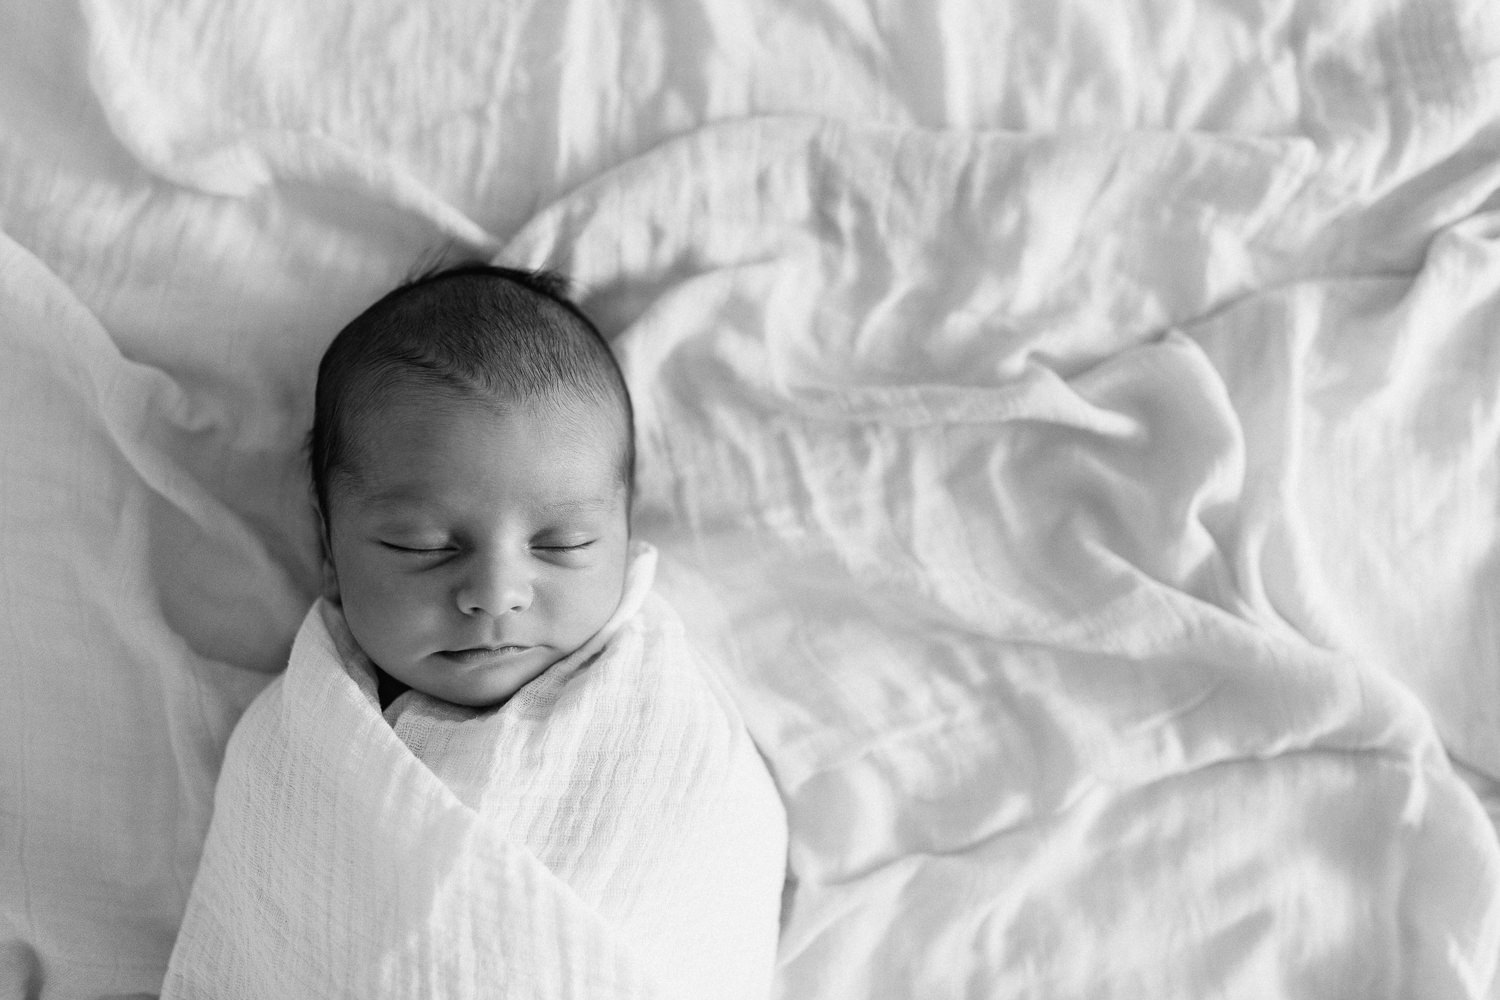 2 week old baby boy with dark hair wrapped in white swaddle lying asleep on bed - York Region In-Home Photos